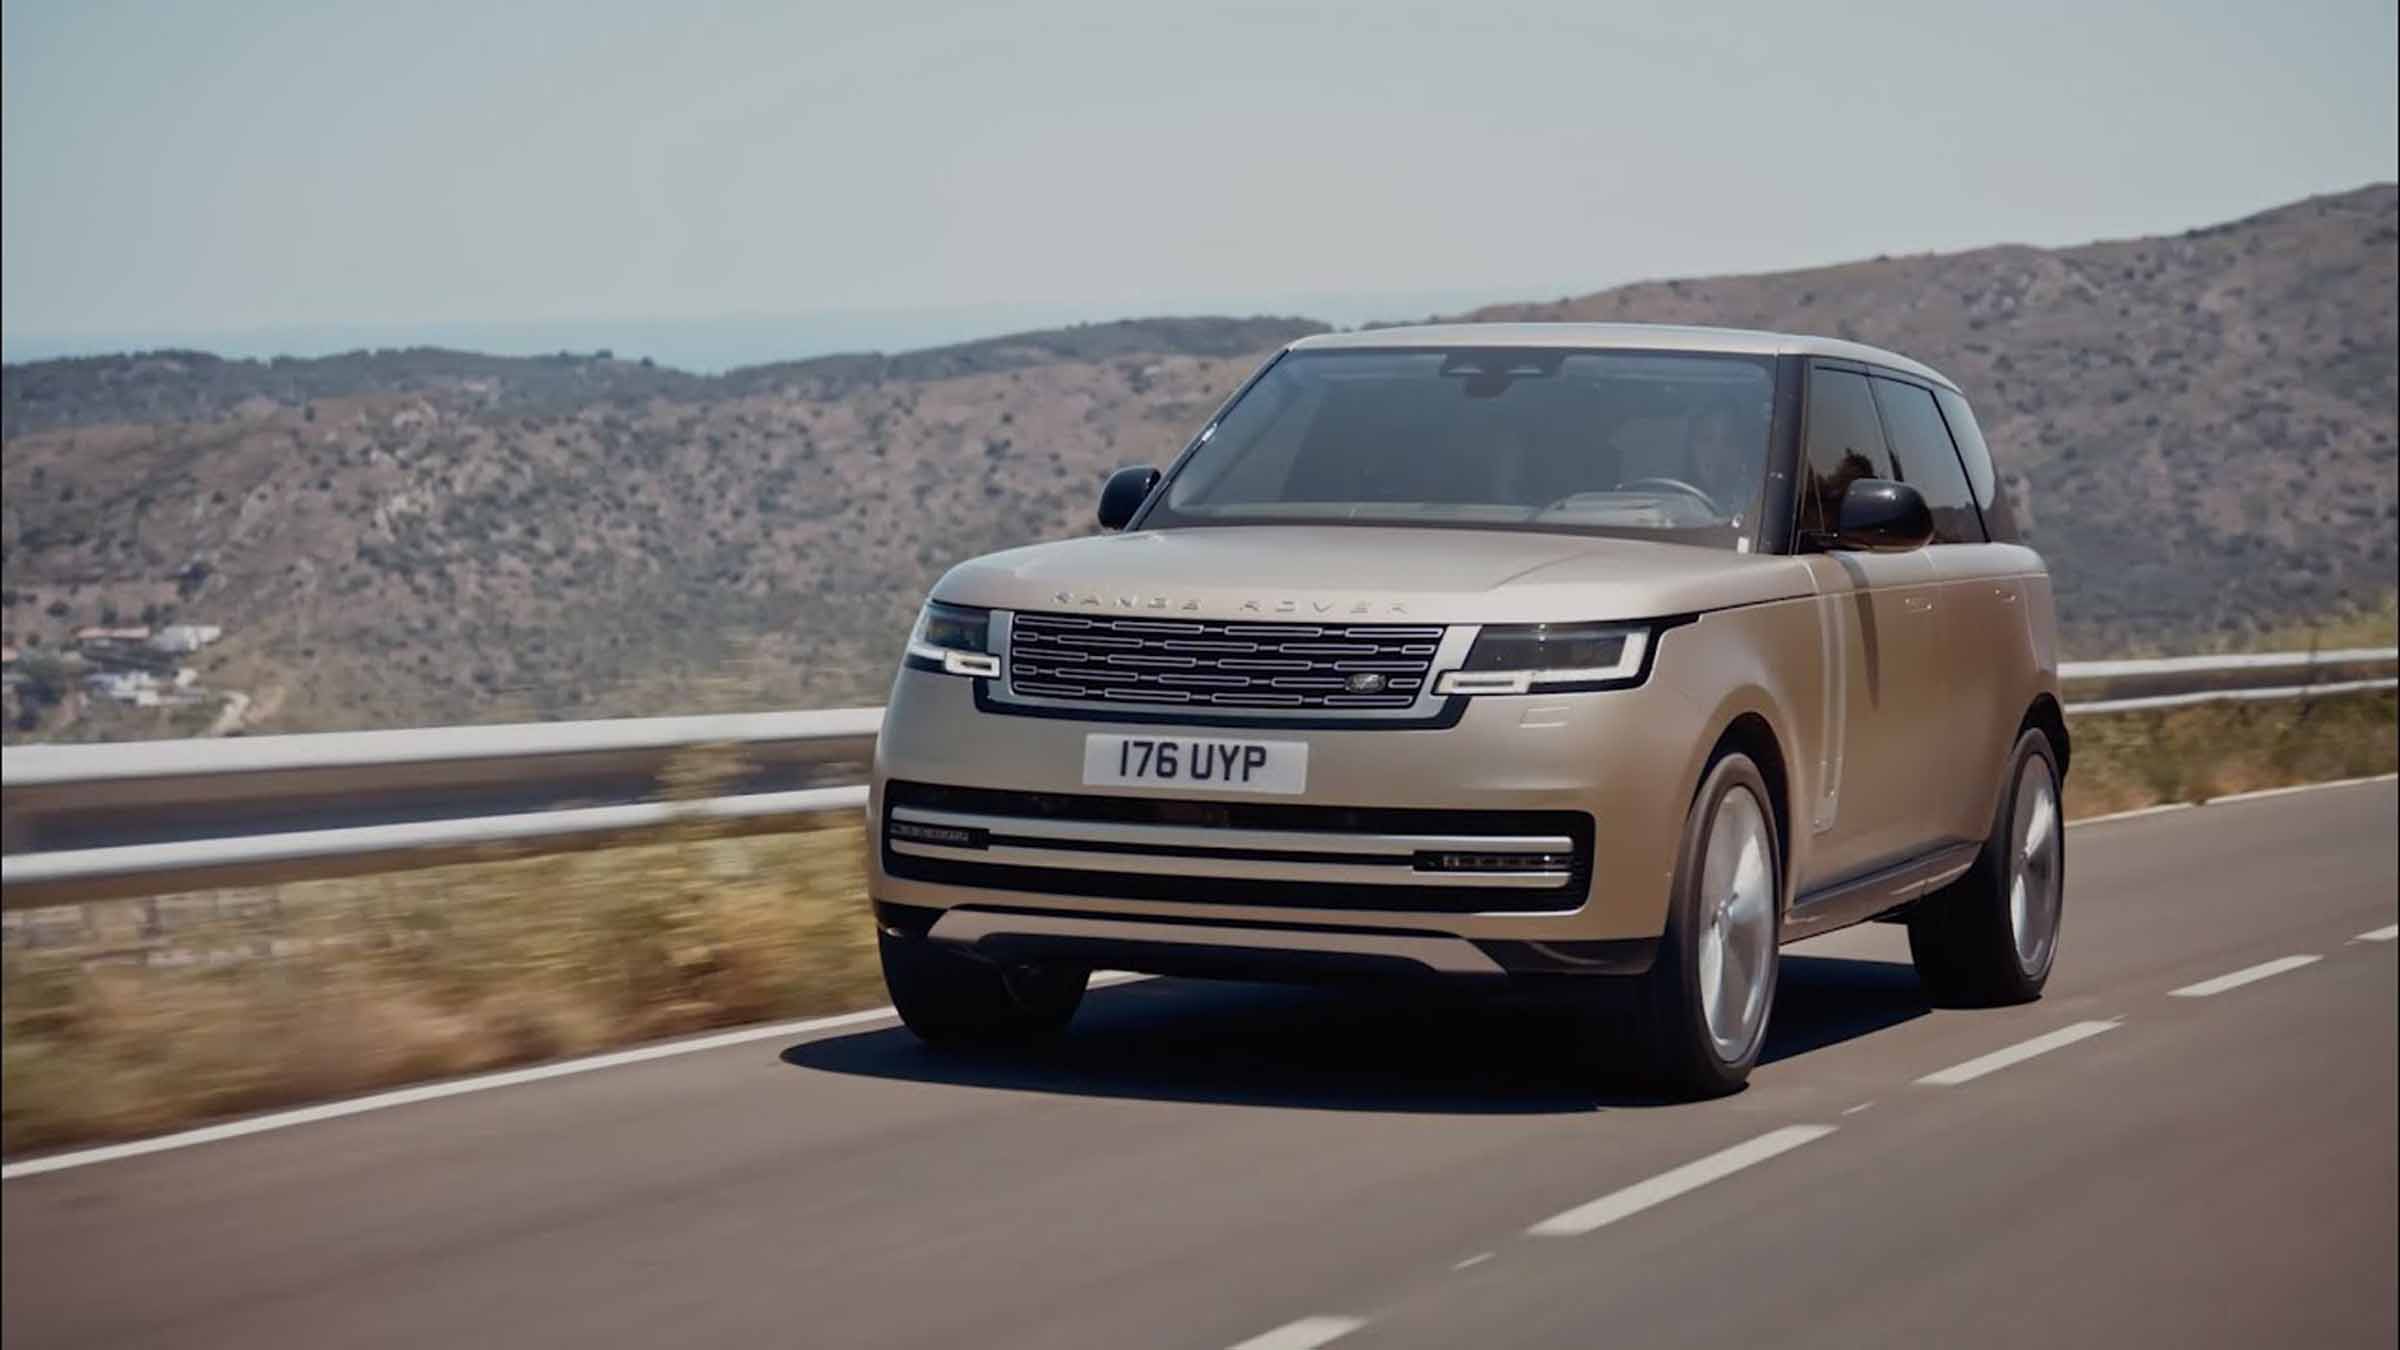 2022 Range Rover P400 SE LWB: A Pricey Large Vehicle with Power and ...